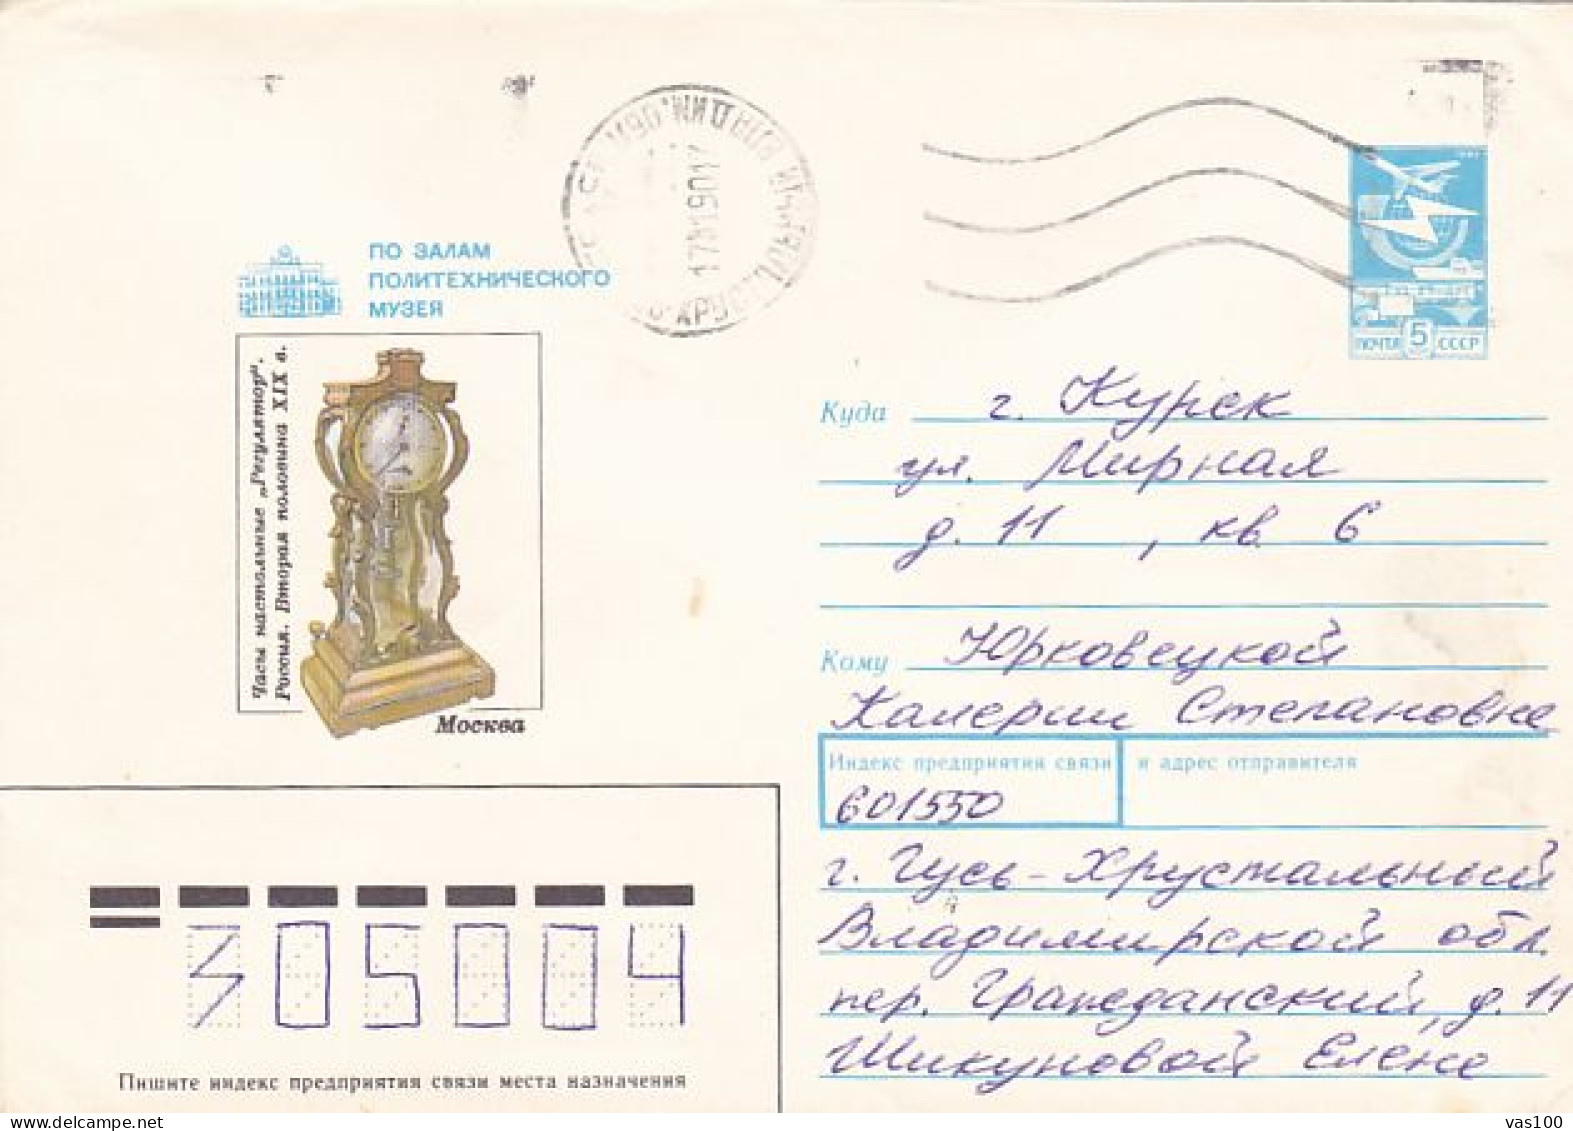 CLOCKS, MOSCOW CLOCK MUSEUM, COVER STATIONERY, ENTIER POSTAL, 1988, RUSSIA - Horlogerie